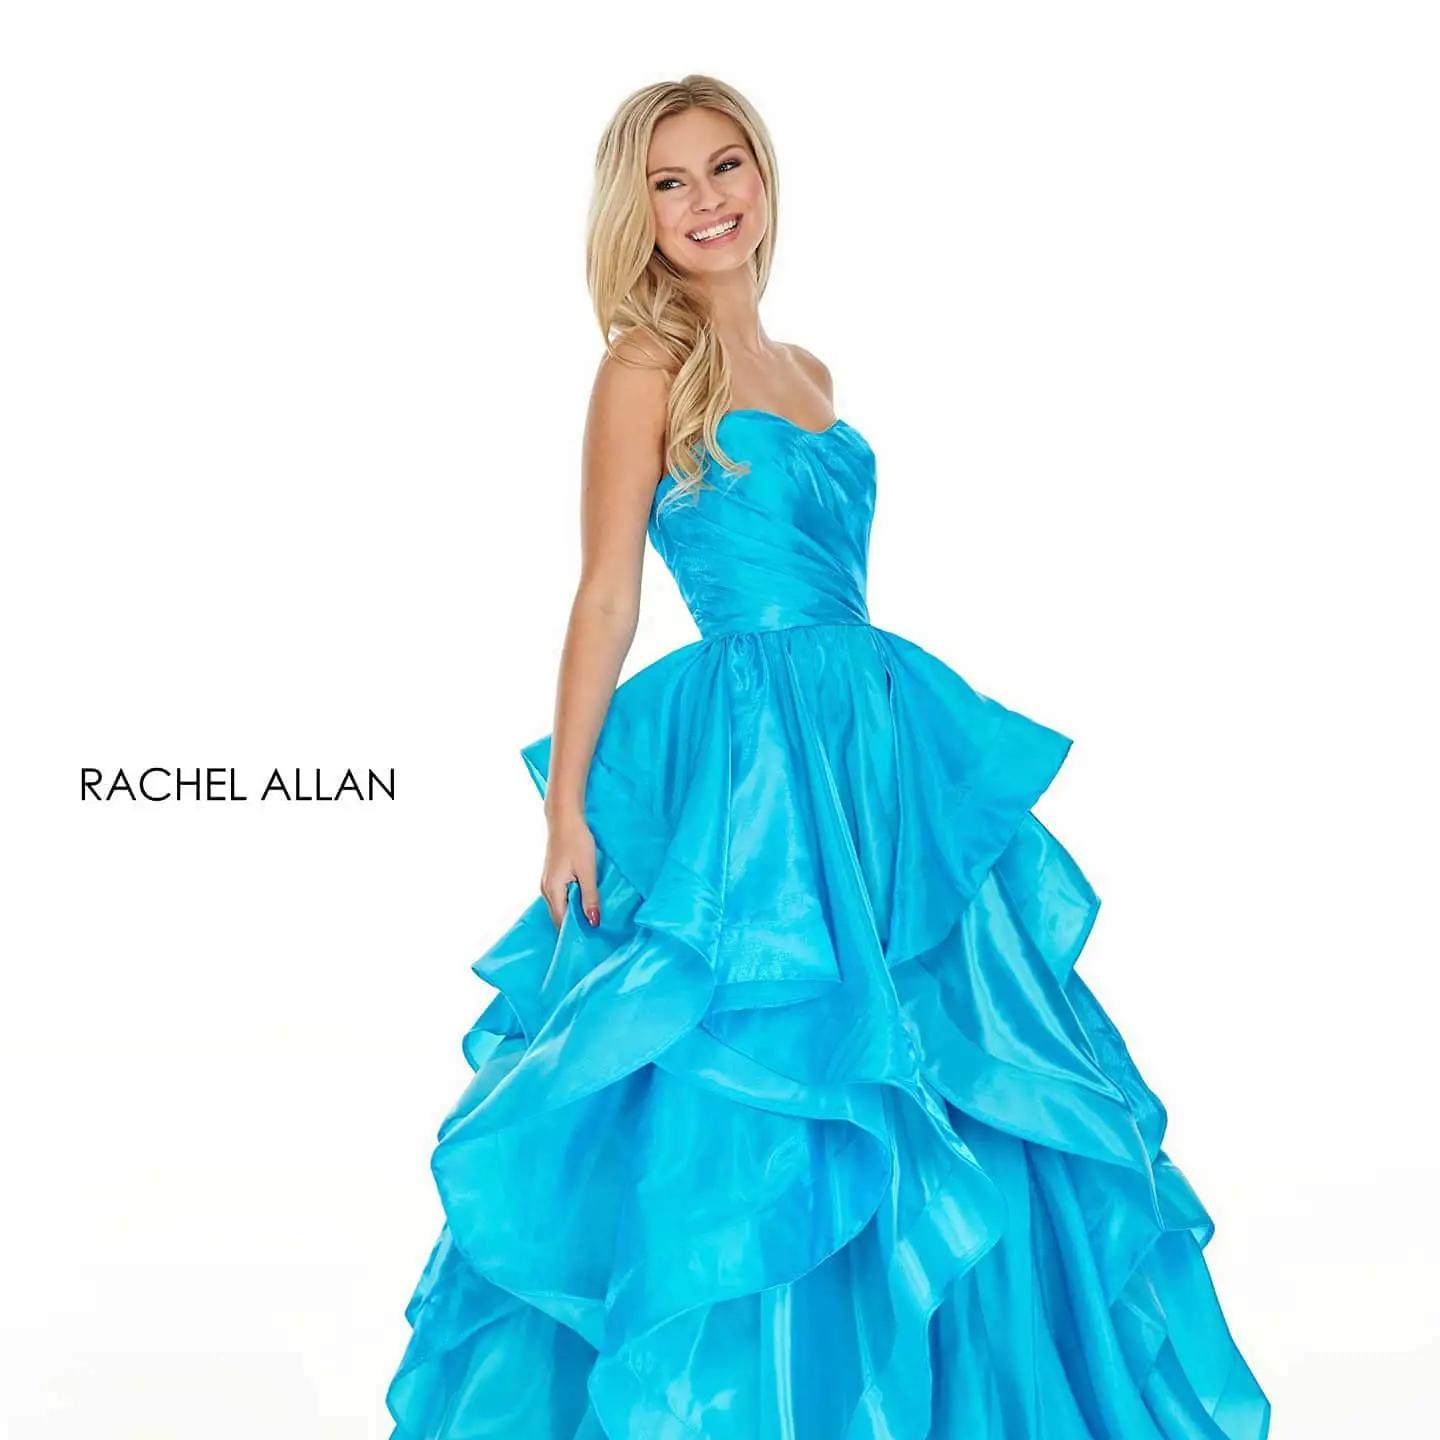 Model wearing a blue gown. Mobile image